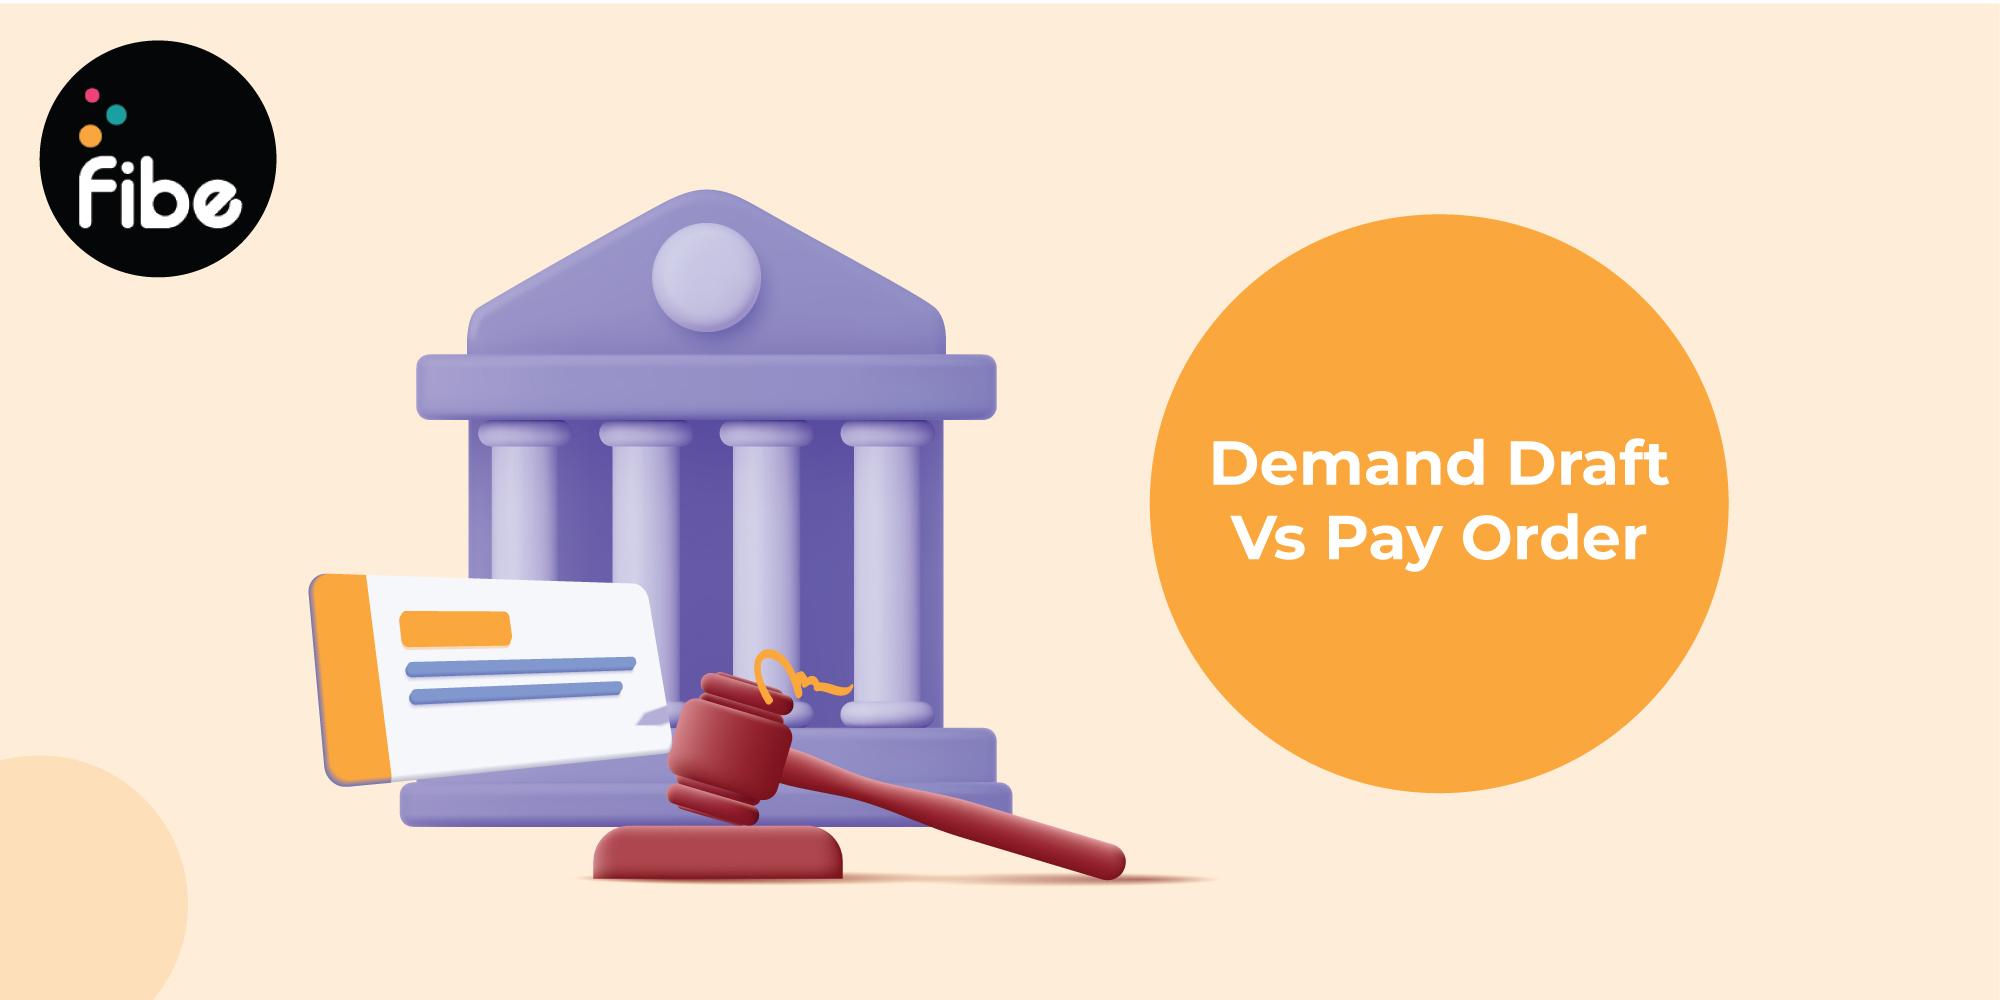 Pay Order Vs Demand Draft: 3 Top Facts You Must Be Aware of